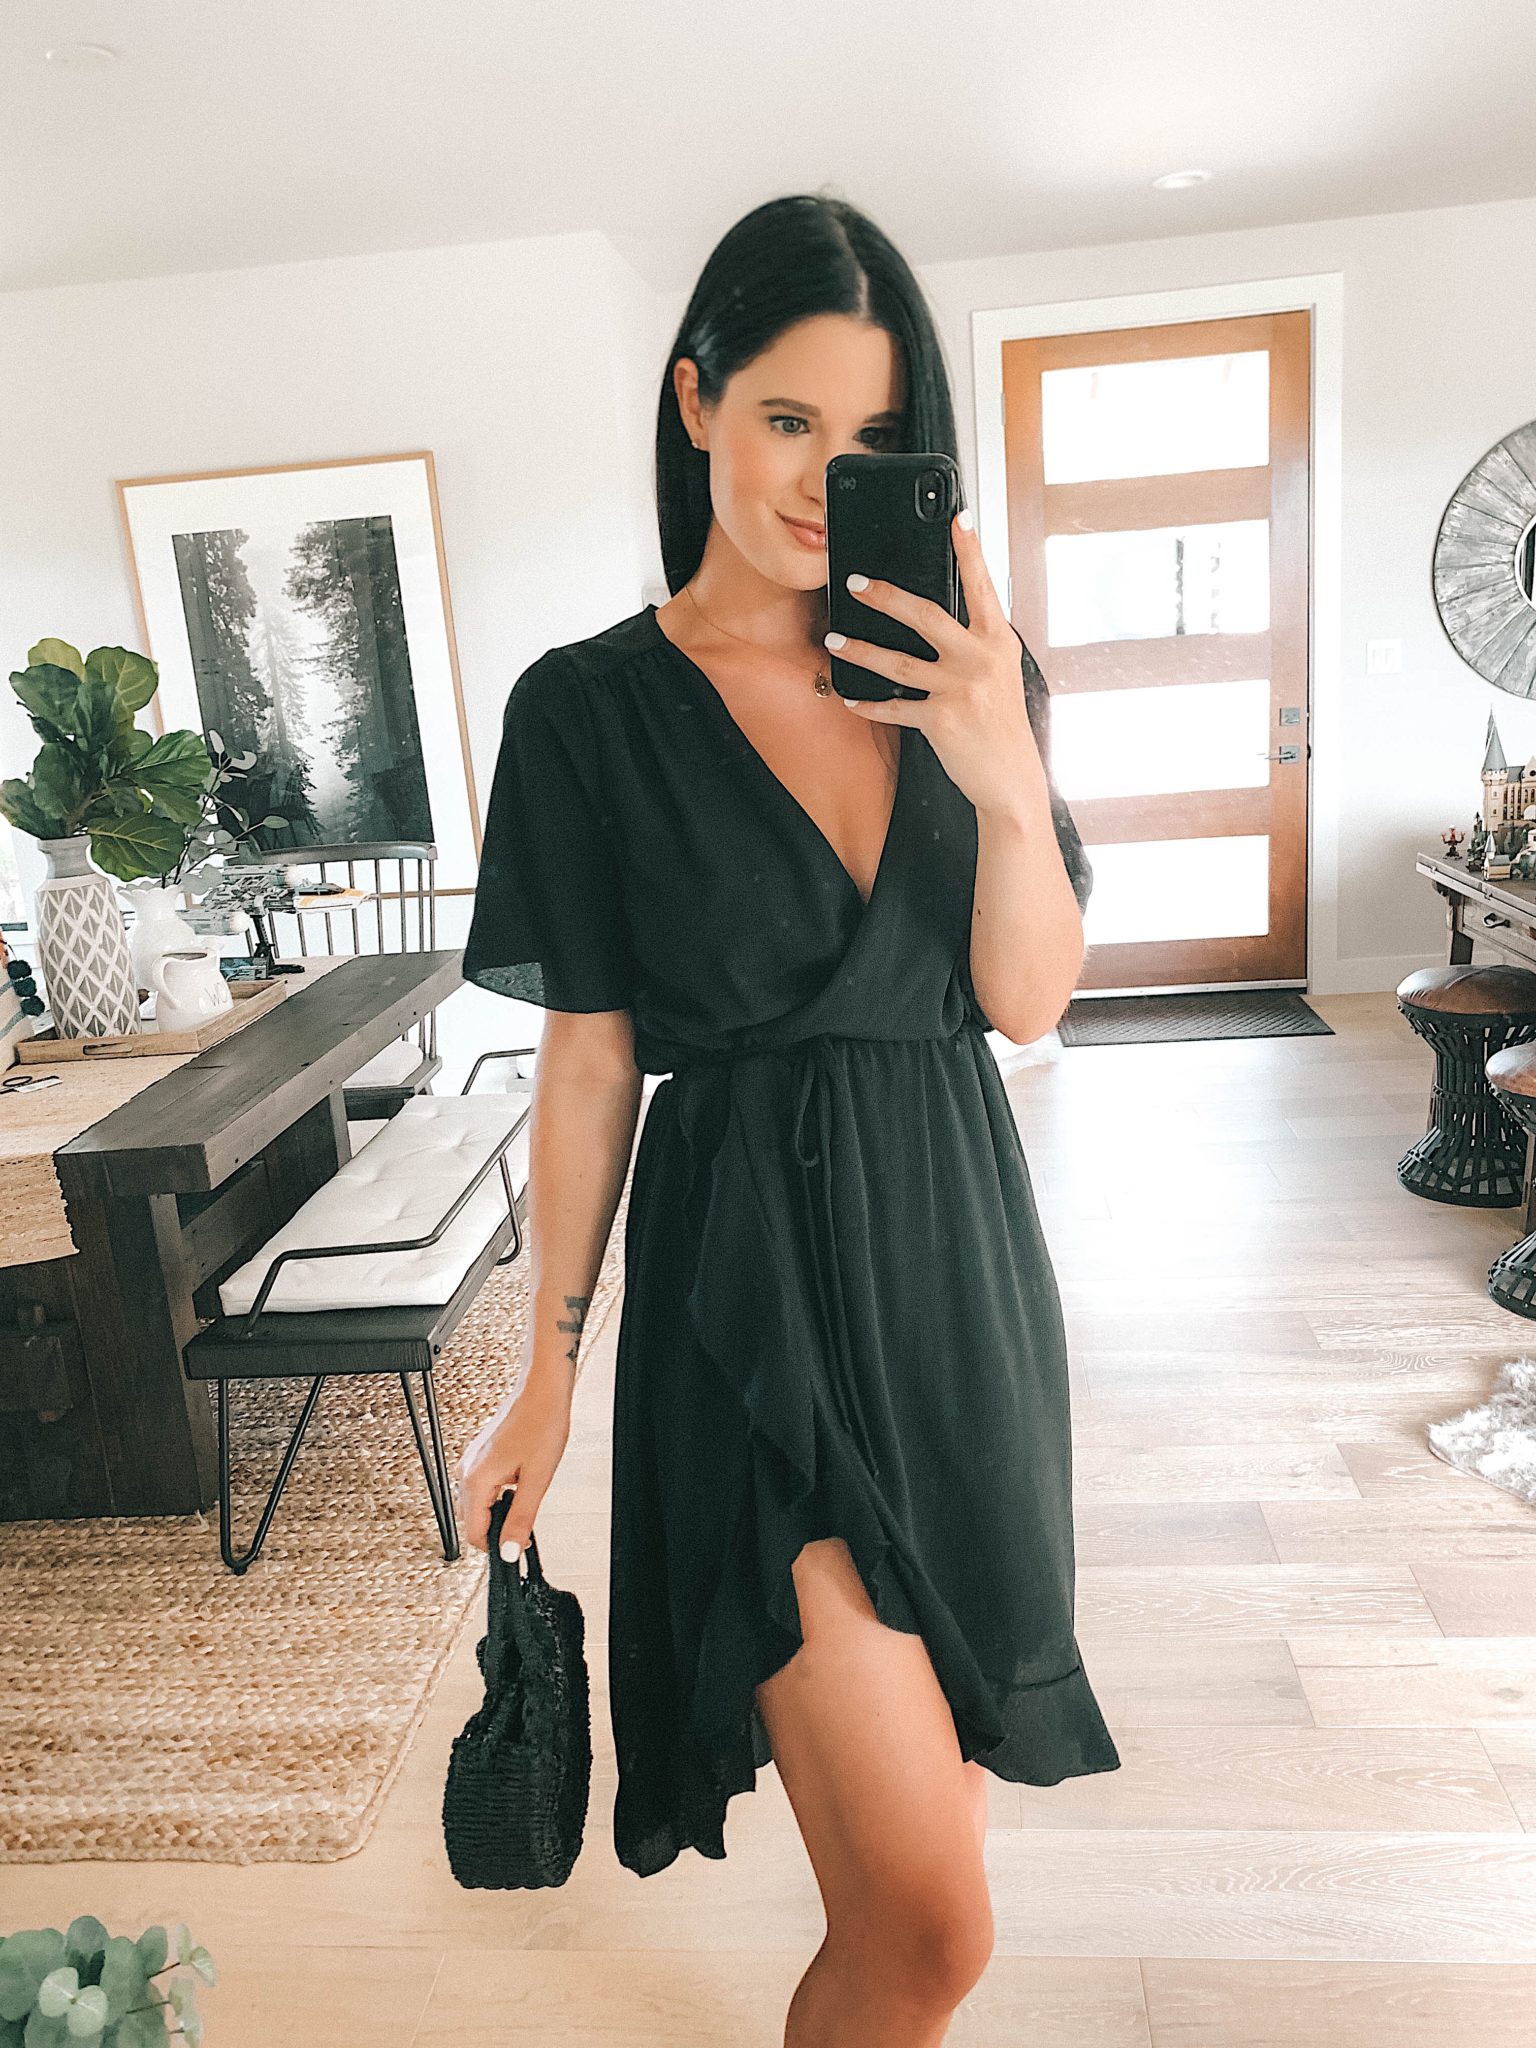 5 Affordable Summer Outfits from Walmart by popular Austin fashion blog, Dressed to Kill: image of a woman standing inside and wearing a black LA Gypsy Women's Midi Front Ruffled Dress.